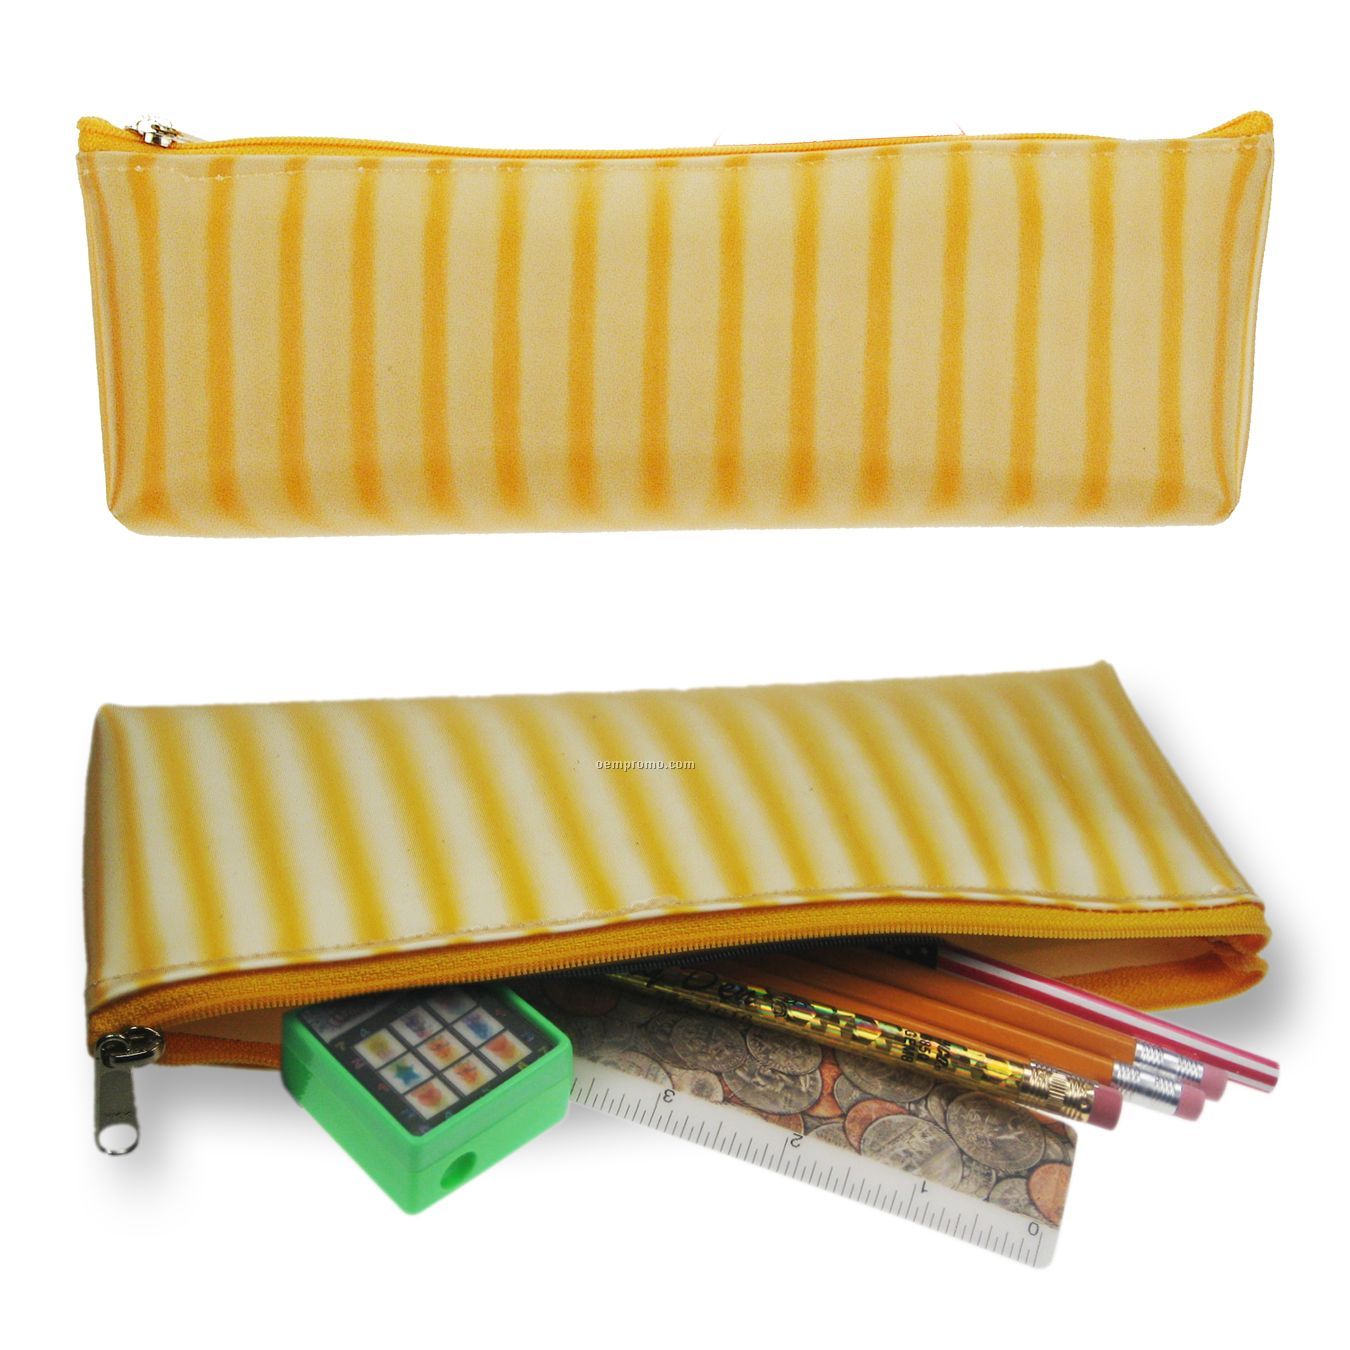 Pencil Case W/3d Lenticular Effects In Yellow/White Stripes (Blanks)